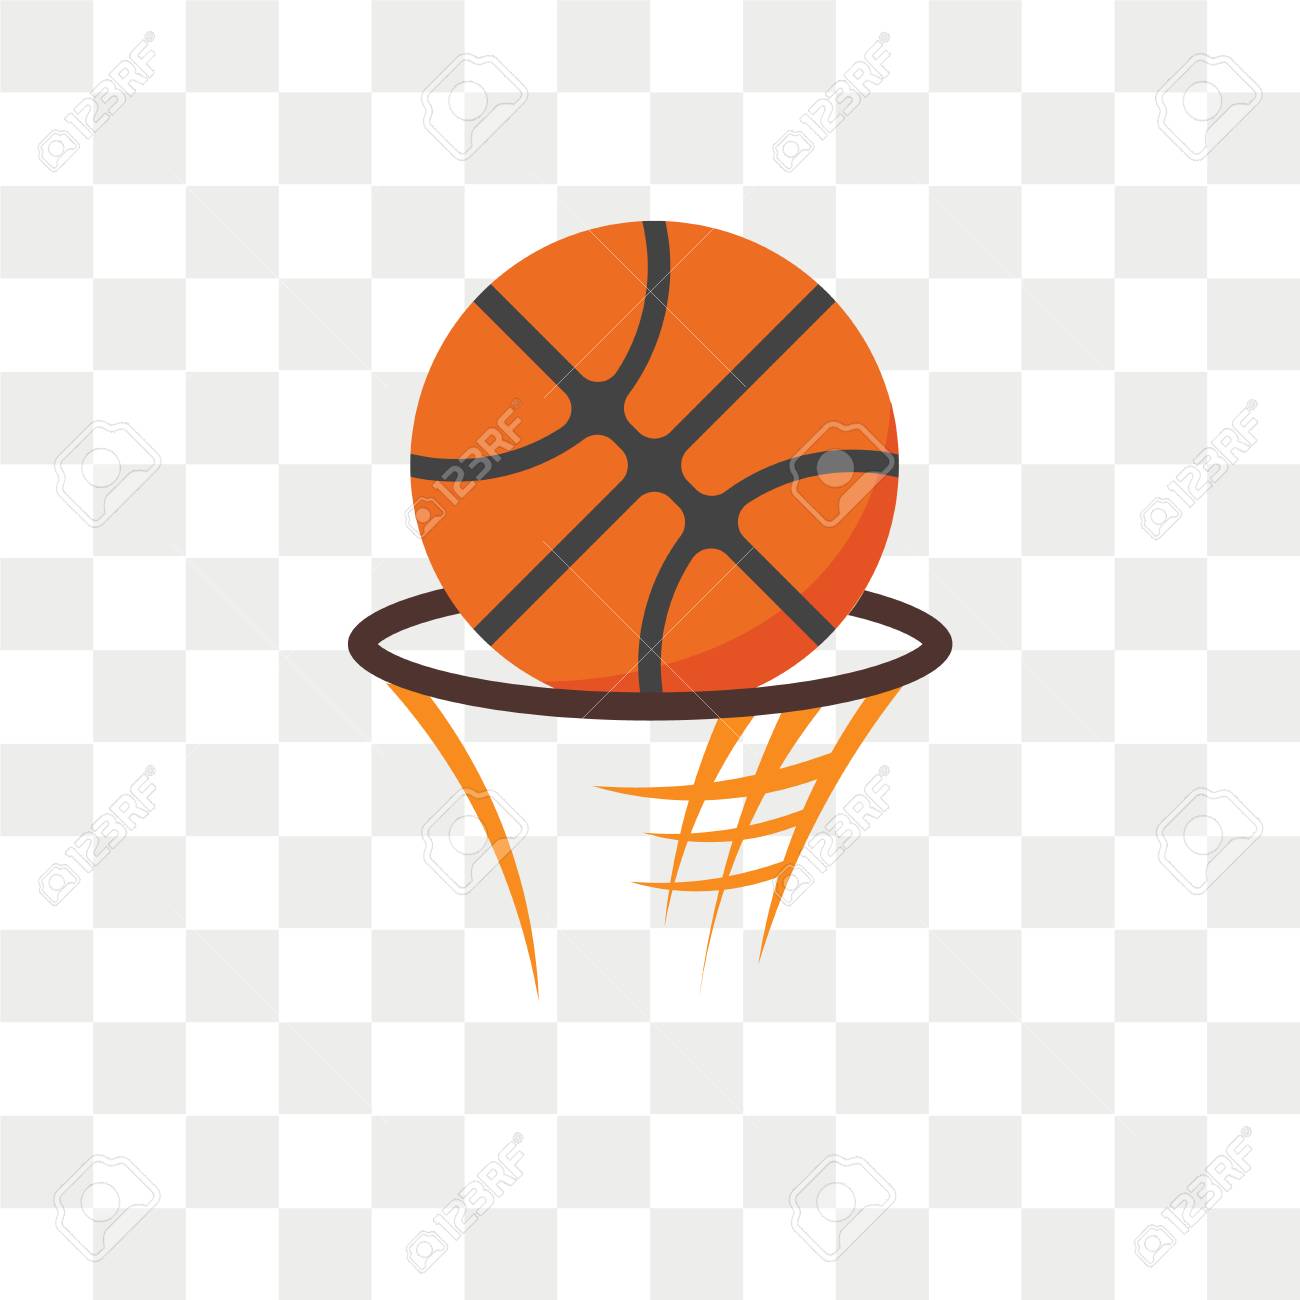 Basketball Vector Icon Isolated On Transparent Background